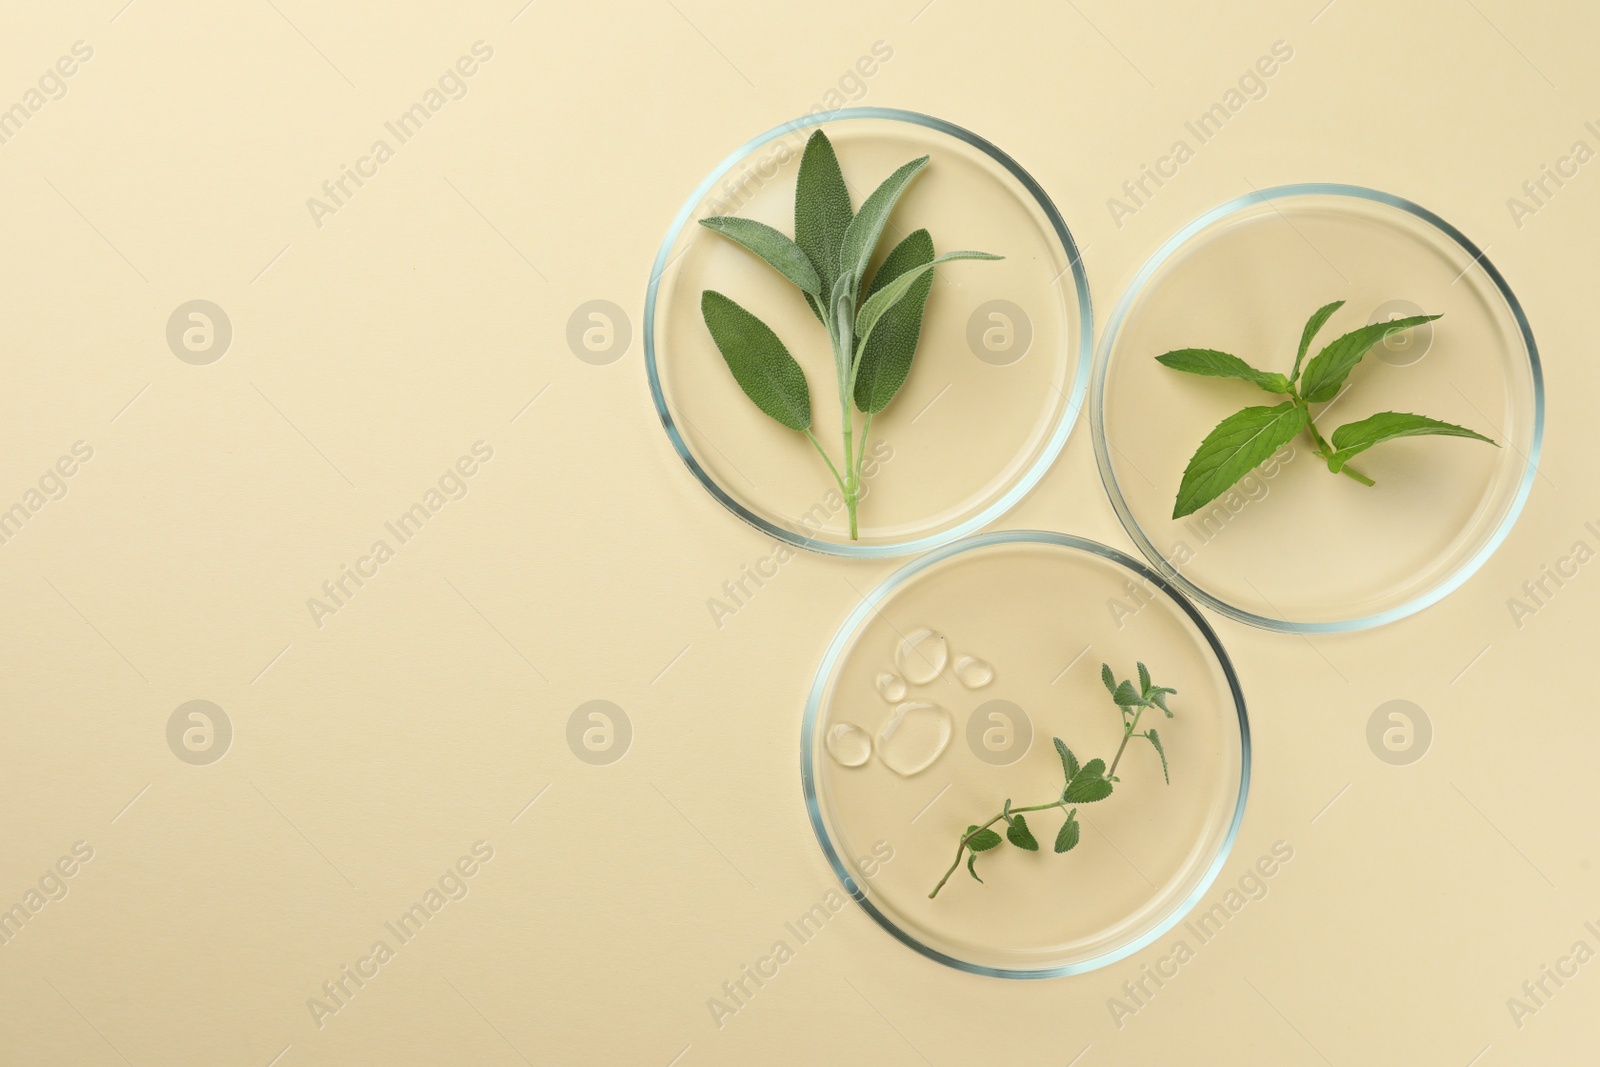 Photo of Flat lay composition with Petri dishes and plants on beige background. Space for text